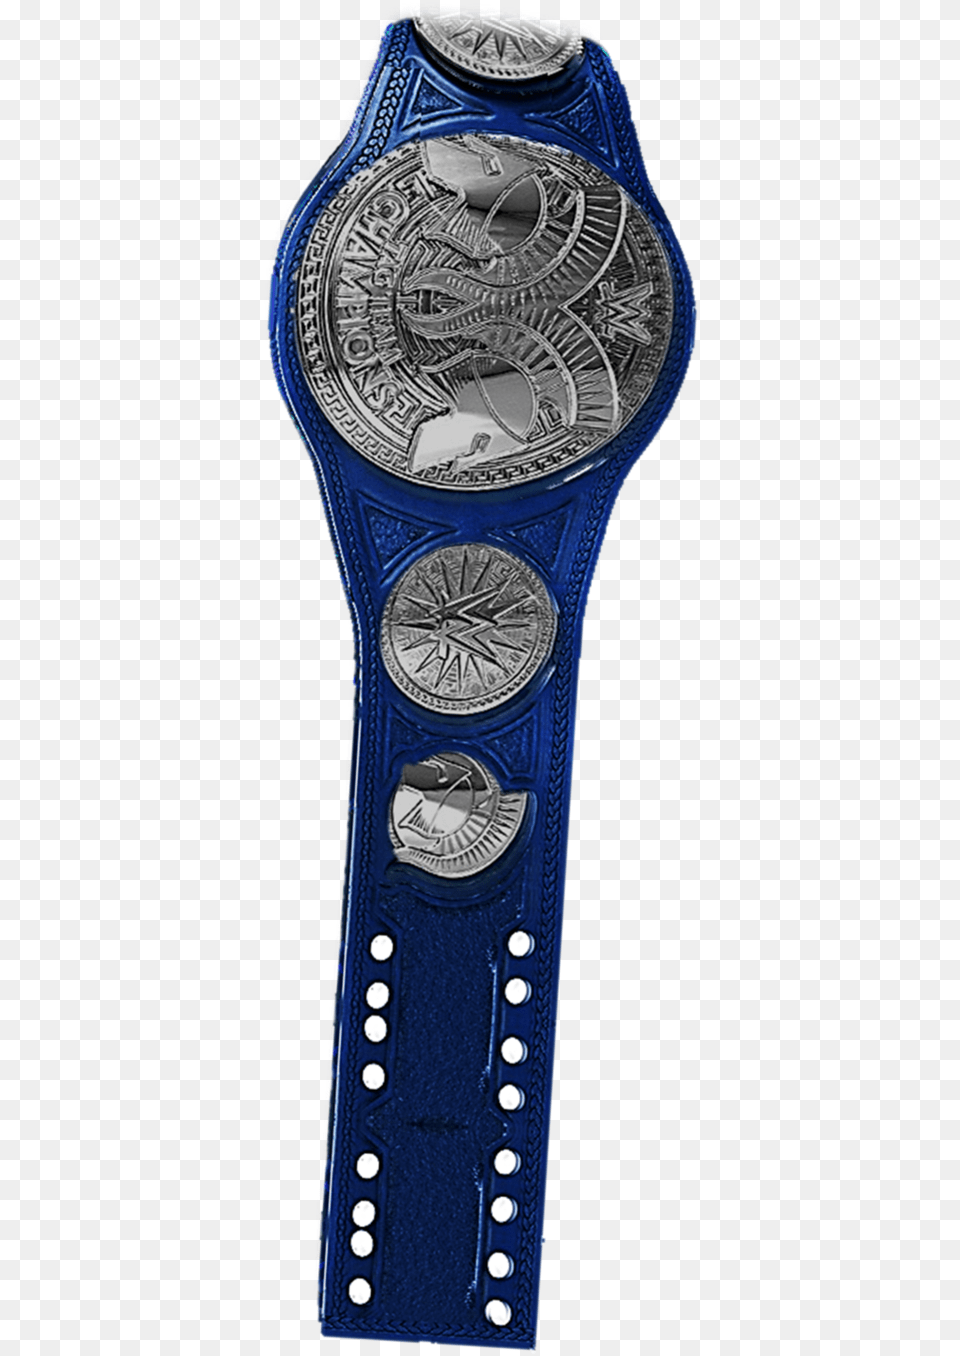 Wwe Smackdown Tag Team Championship Download Smackdown Tag Team Championship, Arm, Body Part, Person, Wristwatch Png Image